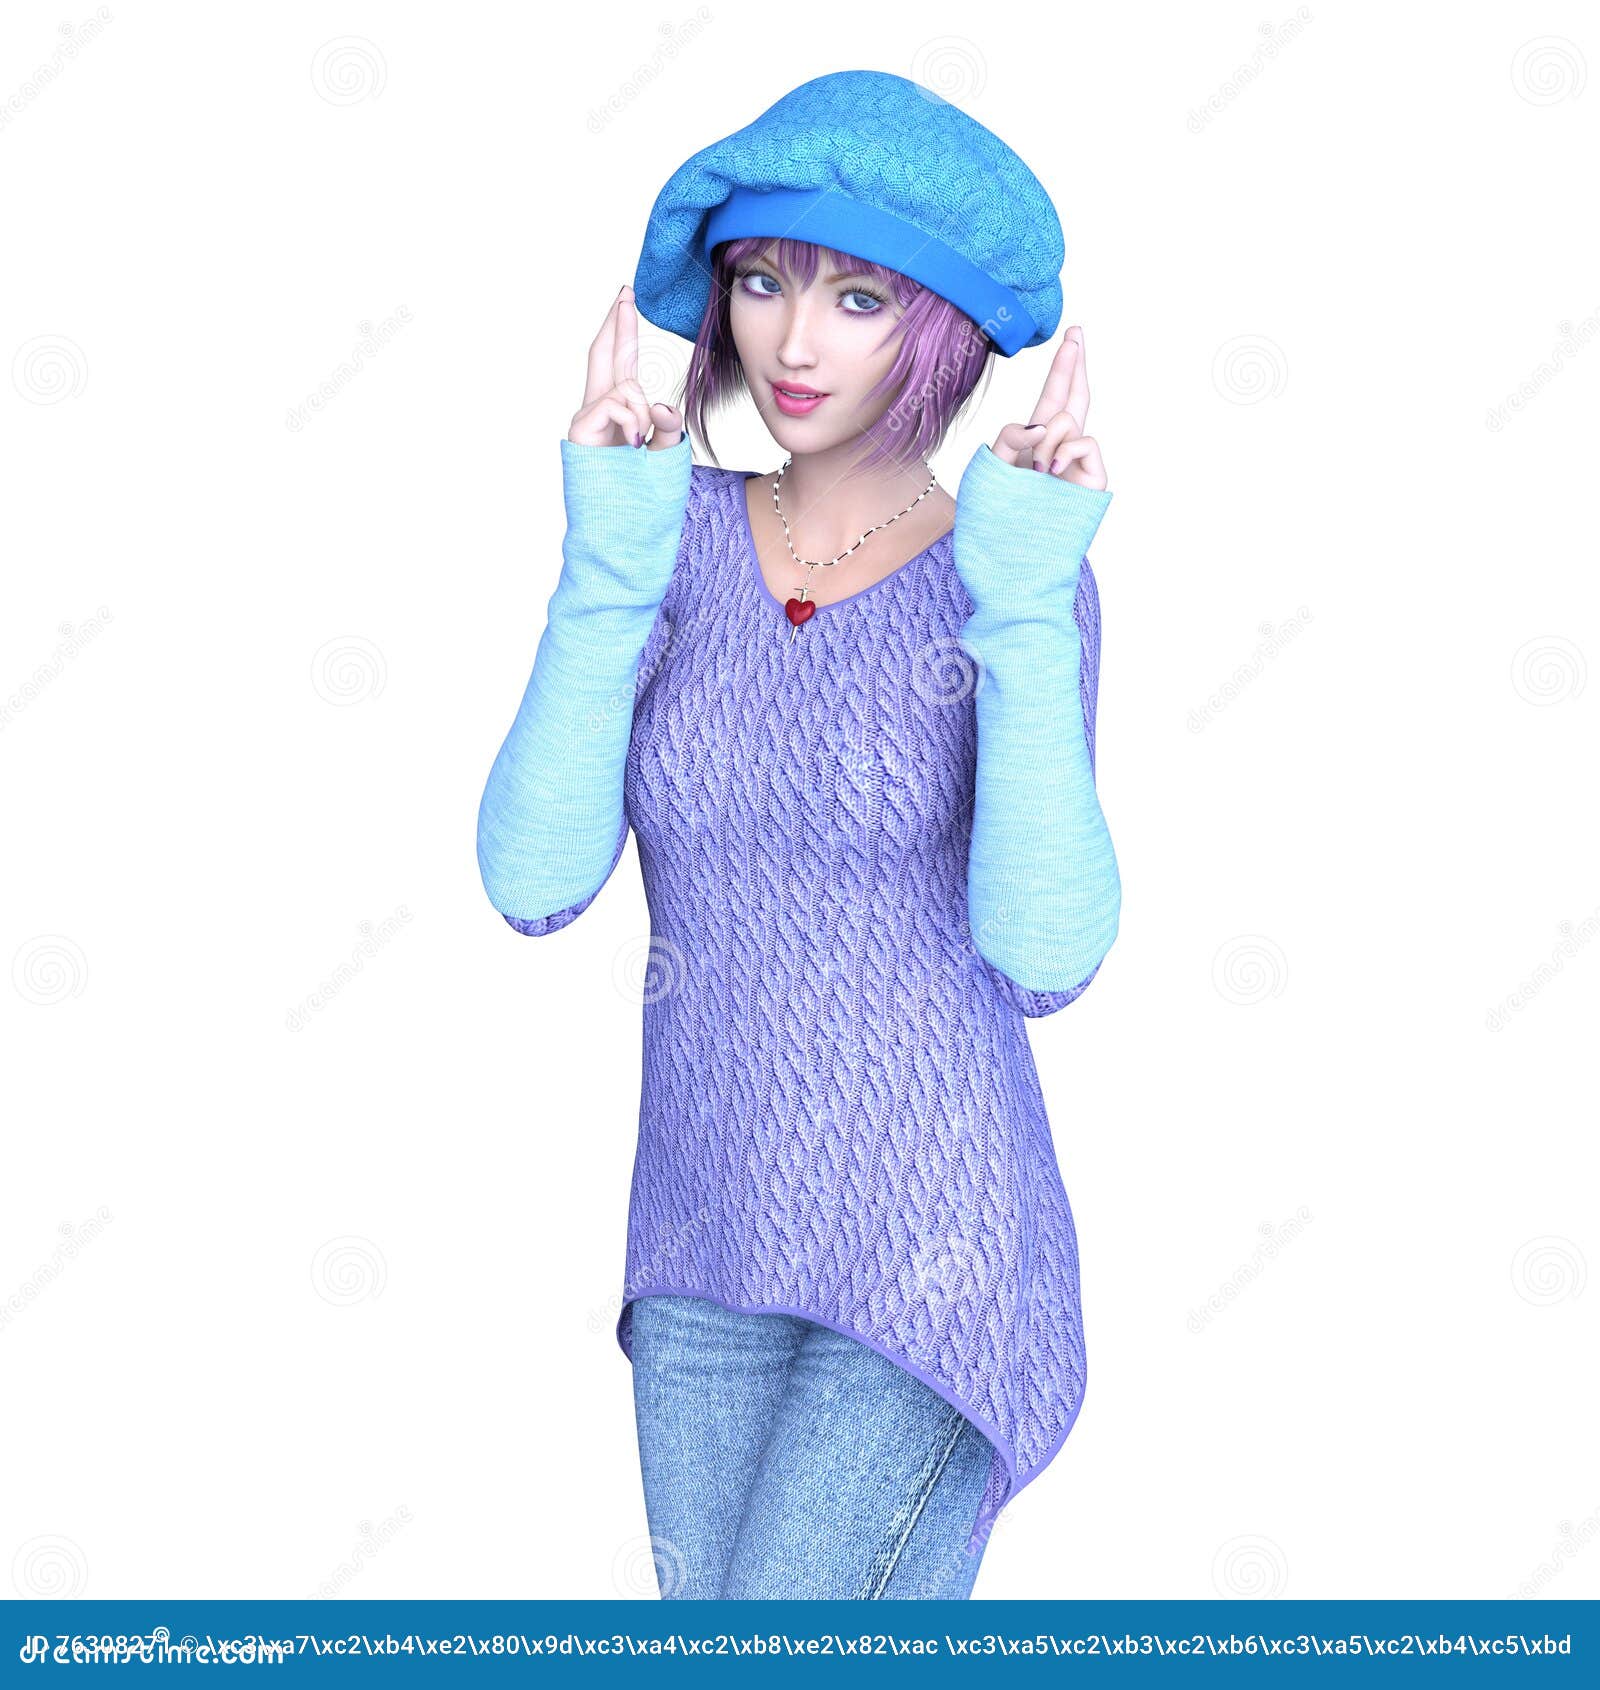 1,520,247 Women Casual Wear Images, Stock Photos, 3D objects